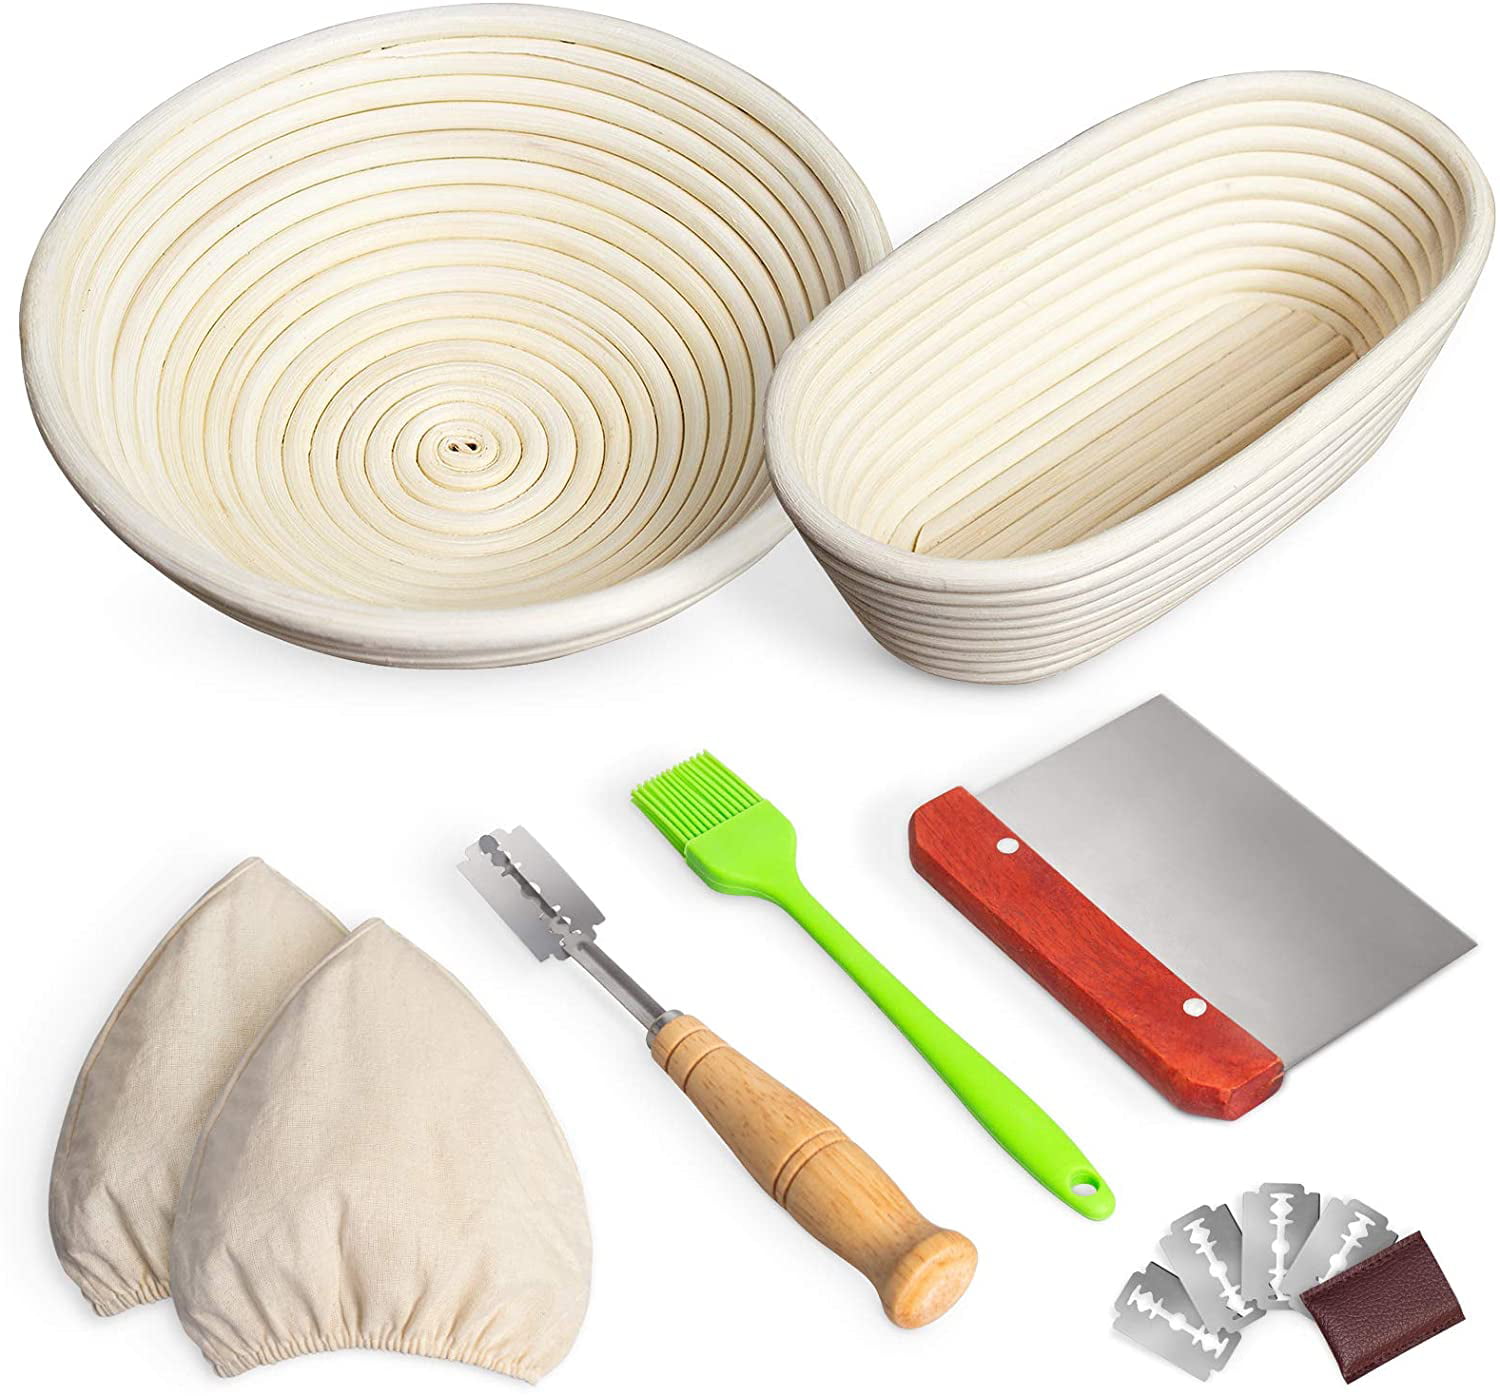 2 Pieces Bread Proofing Basket 9-Inch Round and 10-Inch Oval Fermentation Baskets Sourdough Basket Kit Includes 2 Liners， 1 Stainless Steel Dough Scraper， 1 Bread Lame， 4 Replaceable Blades 